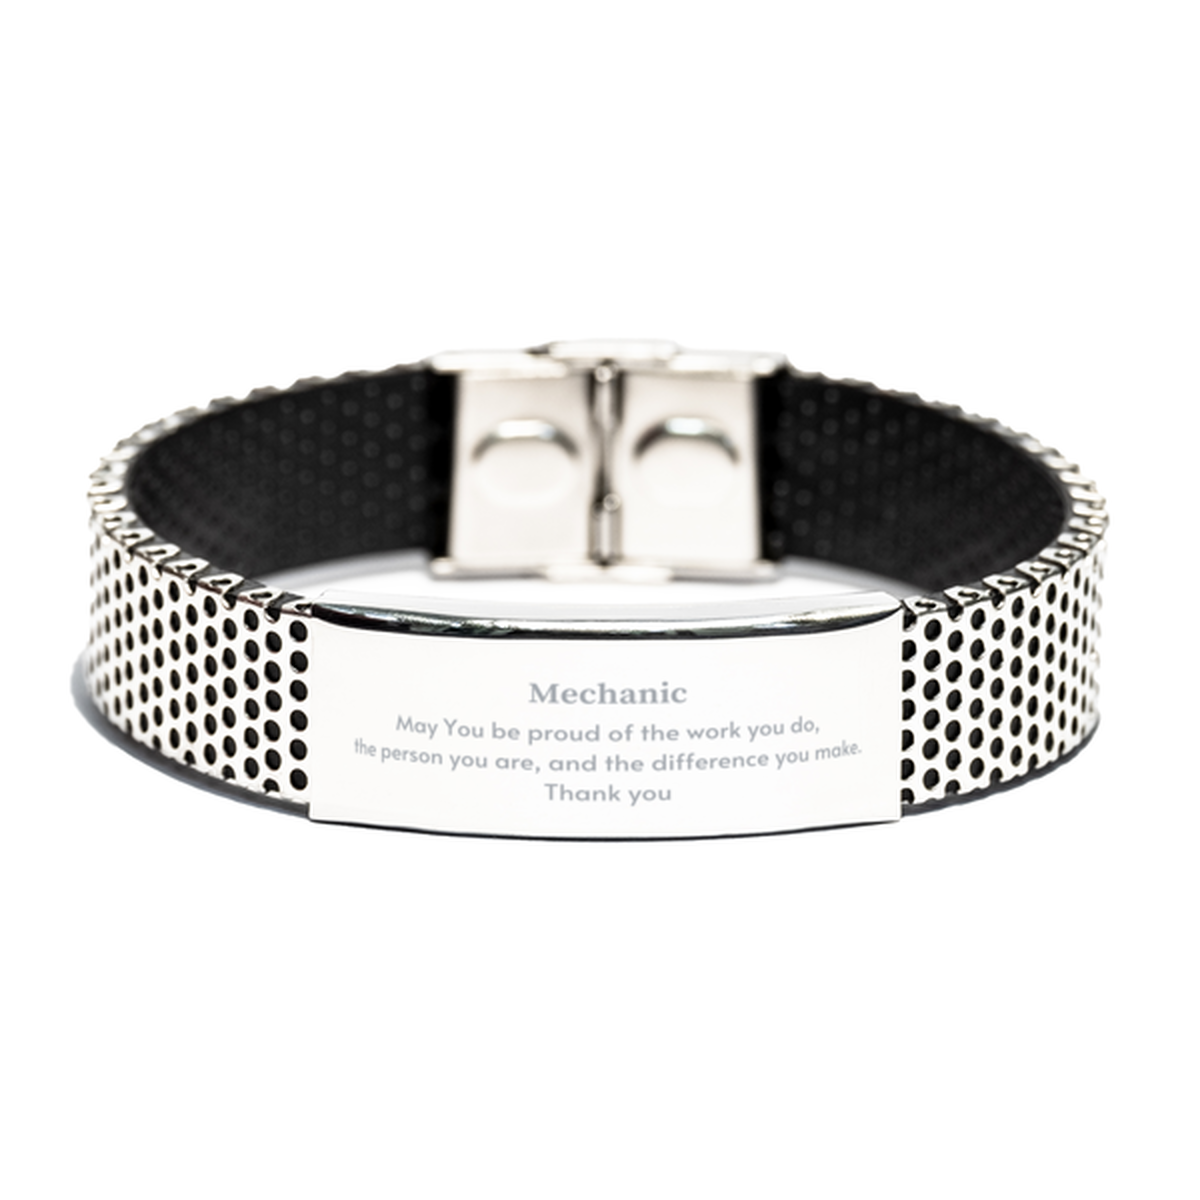 Heartwarming Stainless Steel Bracelet Retirement Coworkers Gifts for Mechanic, Mechanic May You be proud of the work you do, the person you are Gifts for Boss Men Women Friends